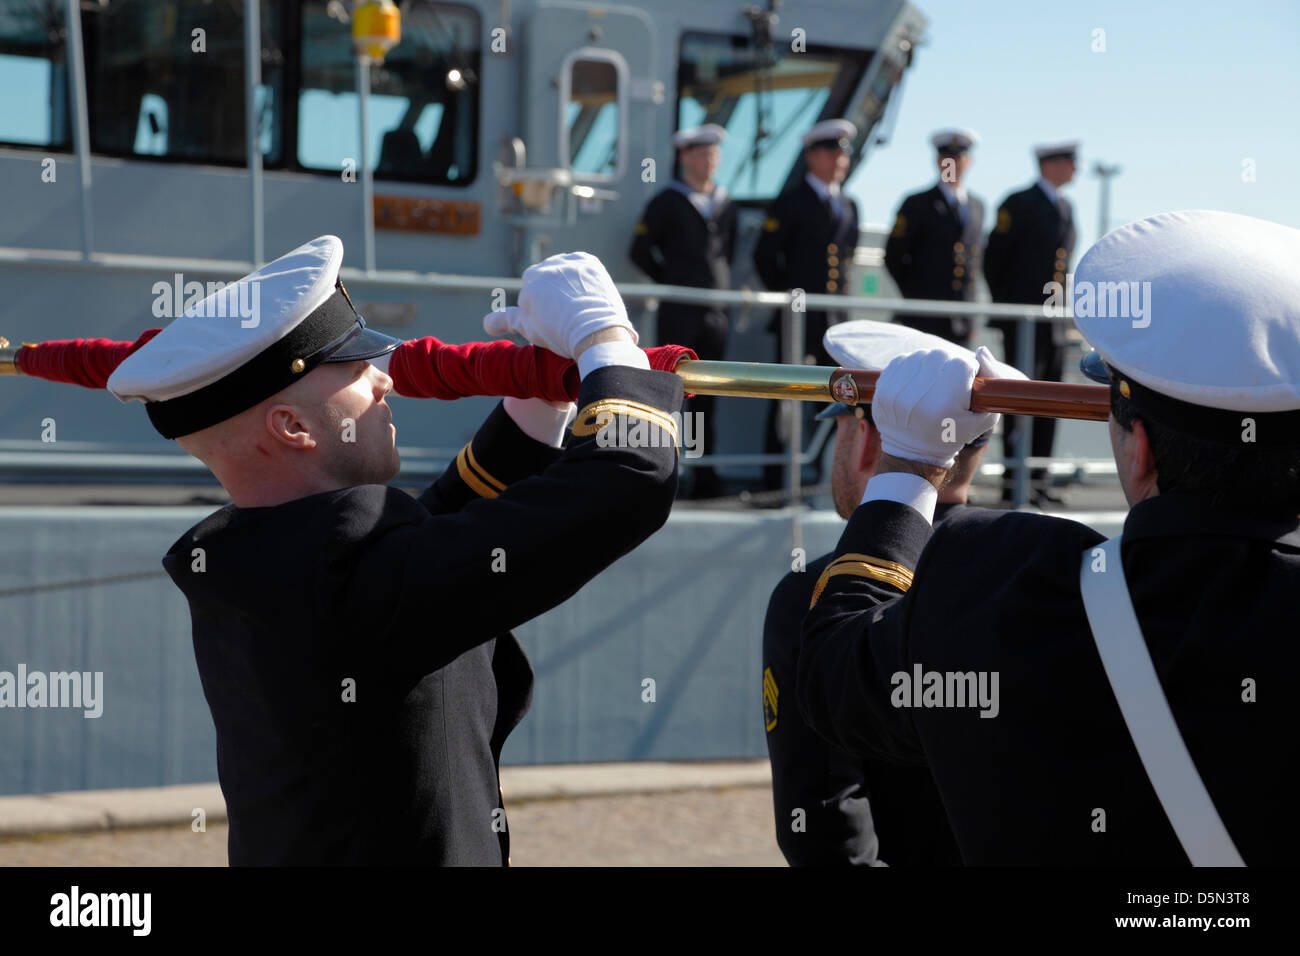 Copenhagen, Denmark. April 4th 2013. Cadets from the Royal Danish Naval Academy roll and tie knots on the swallow-tails of the naval flag after a parade through Copenhagen before the flag is paraded on board the naval training ship Alholm at Amaliehaven quay to mark the beginning of a new sailing season. Credit:  Niels Quist / Alamy Live News Stock Photo